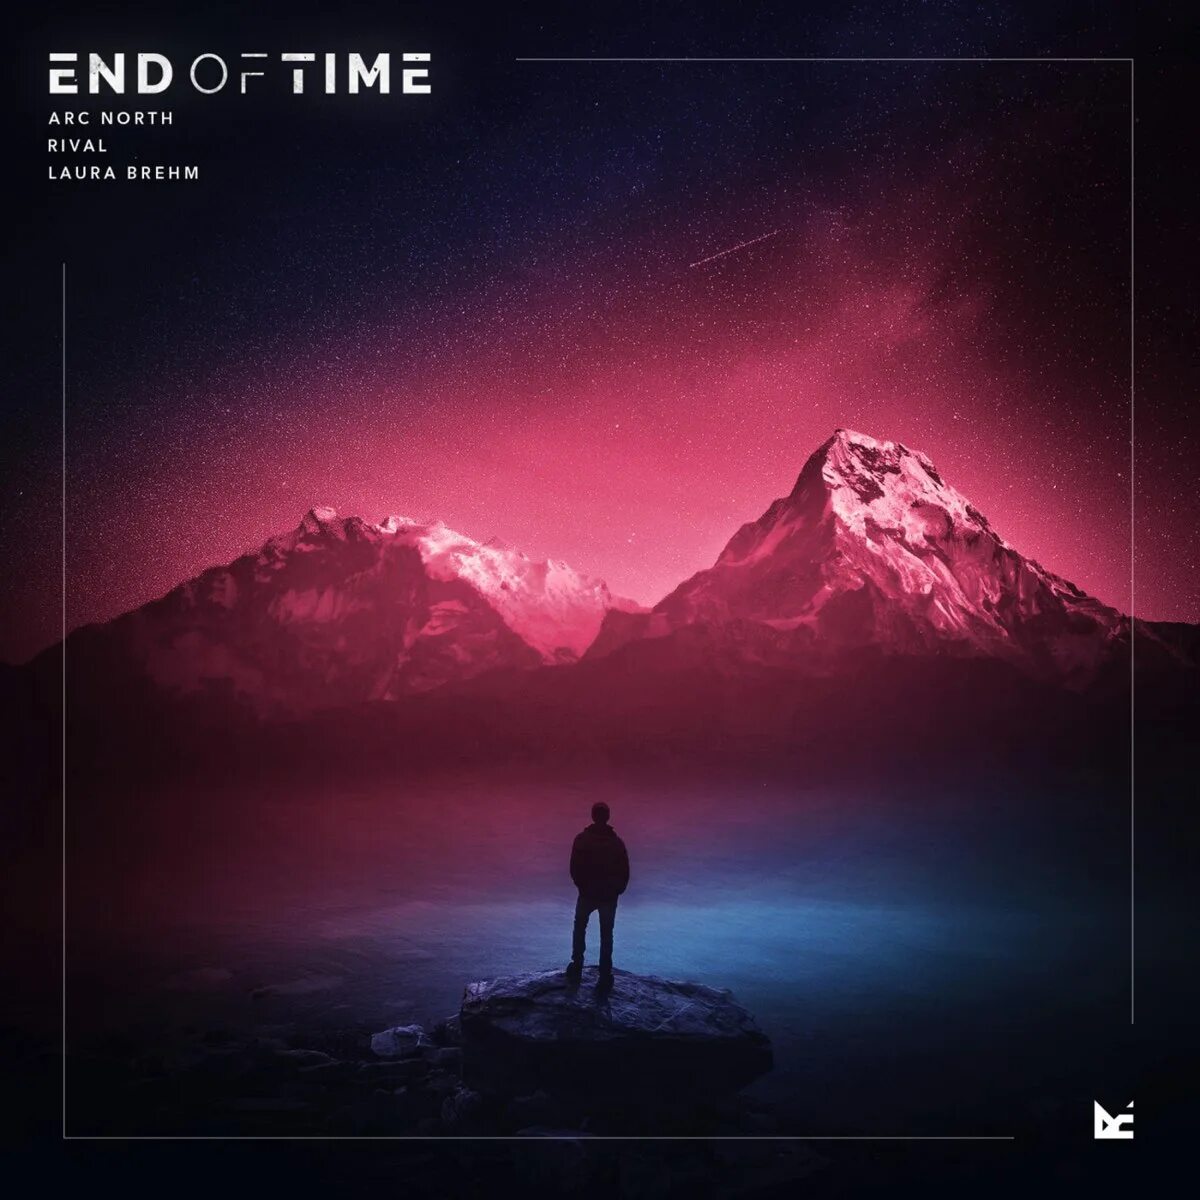 Arc North x Rival x Laura Brehm - end of time. Arc North Laura Brehm Rival end of time. End of time - Floatinurboat Remix. Alan Walker end of time. Arc north